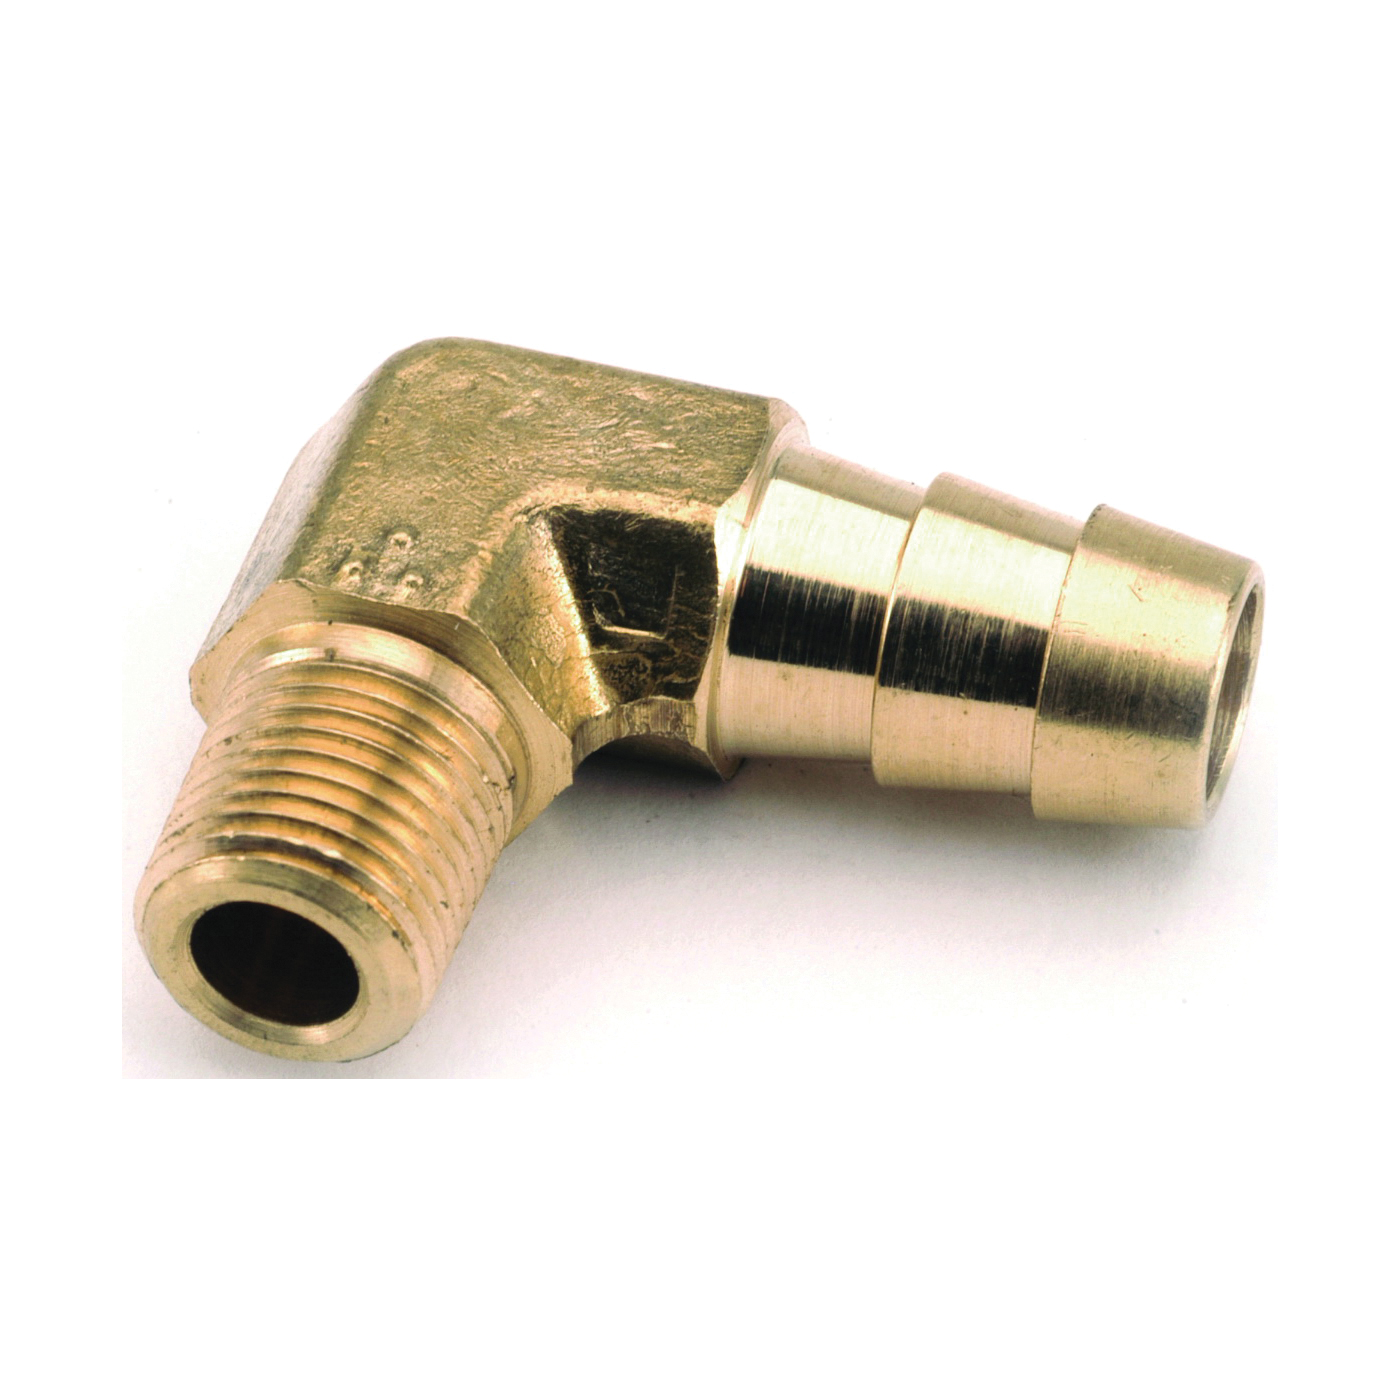 Anderson Metals 129E Series 757020-0604 Hose Elbow, 3/8 in, Barb, 1/4 in, MPT, Brass - 1